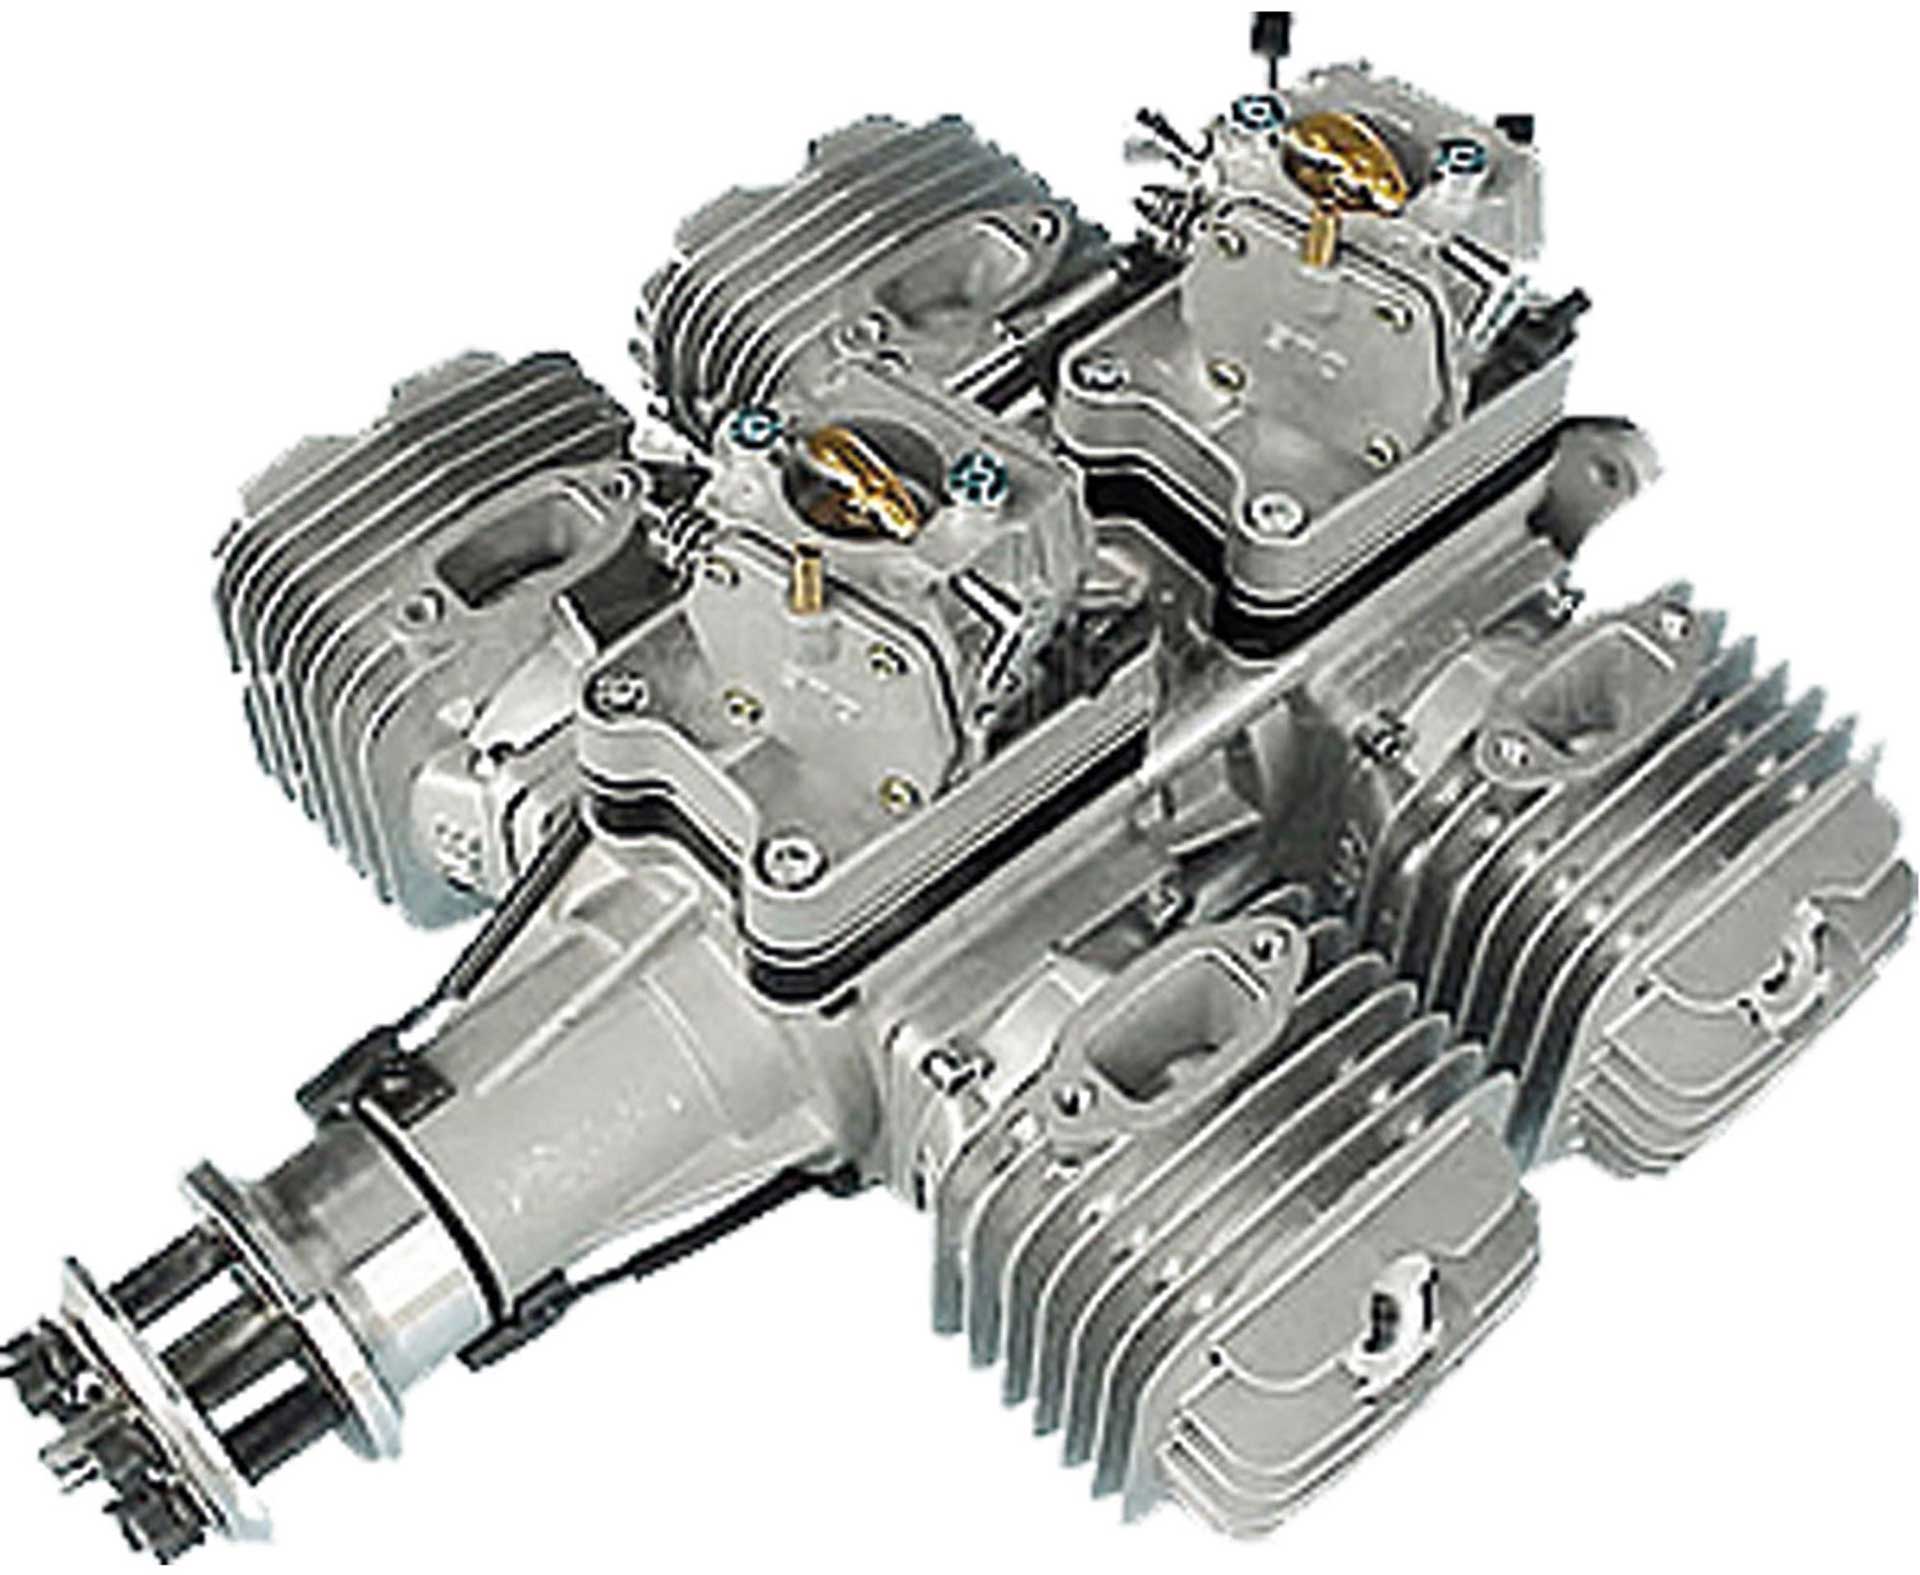 DLE Engines DLE 222 4-cylinder gasoline engine "genuine" with inspection